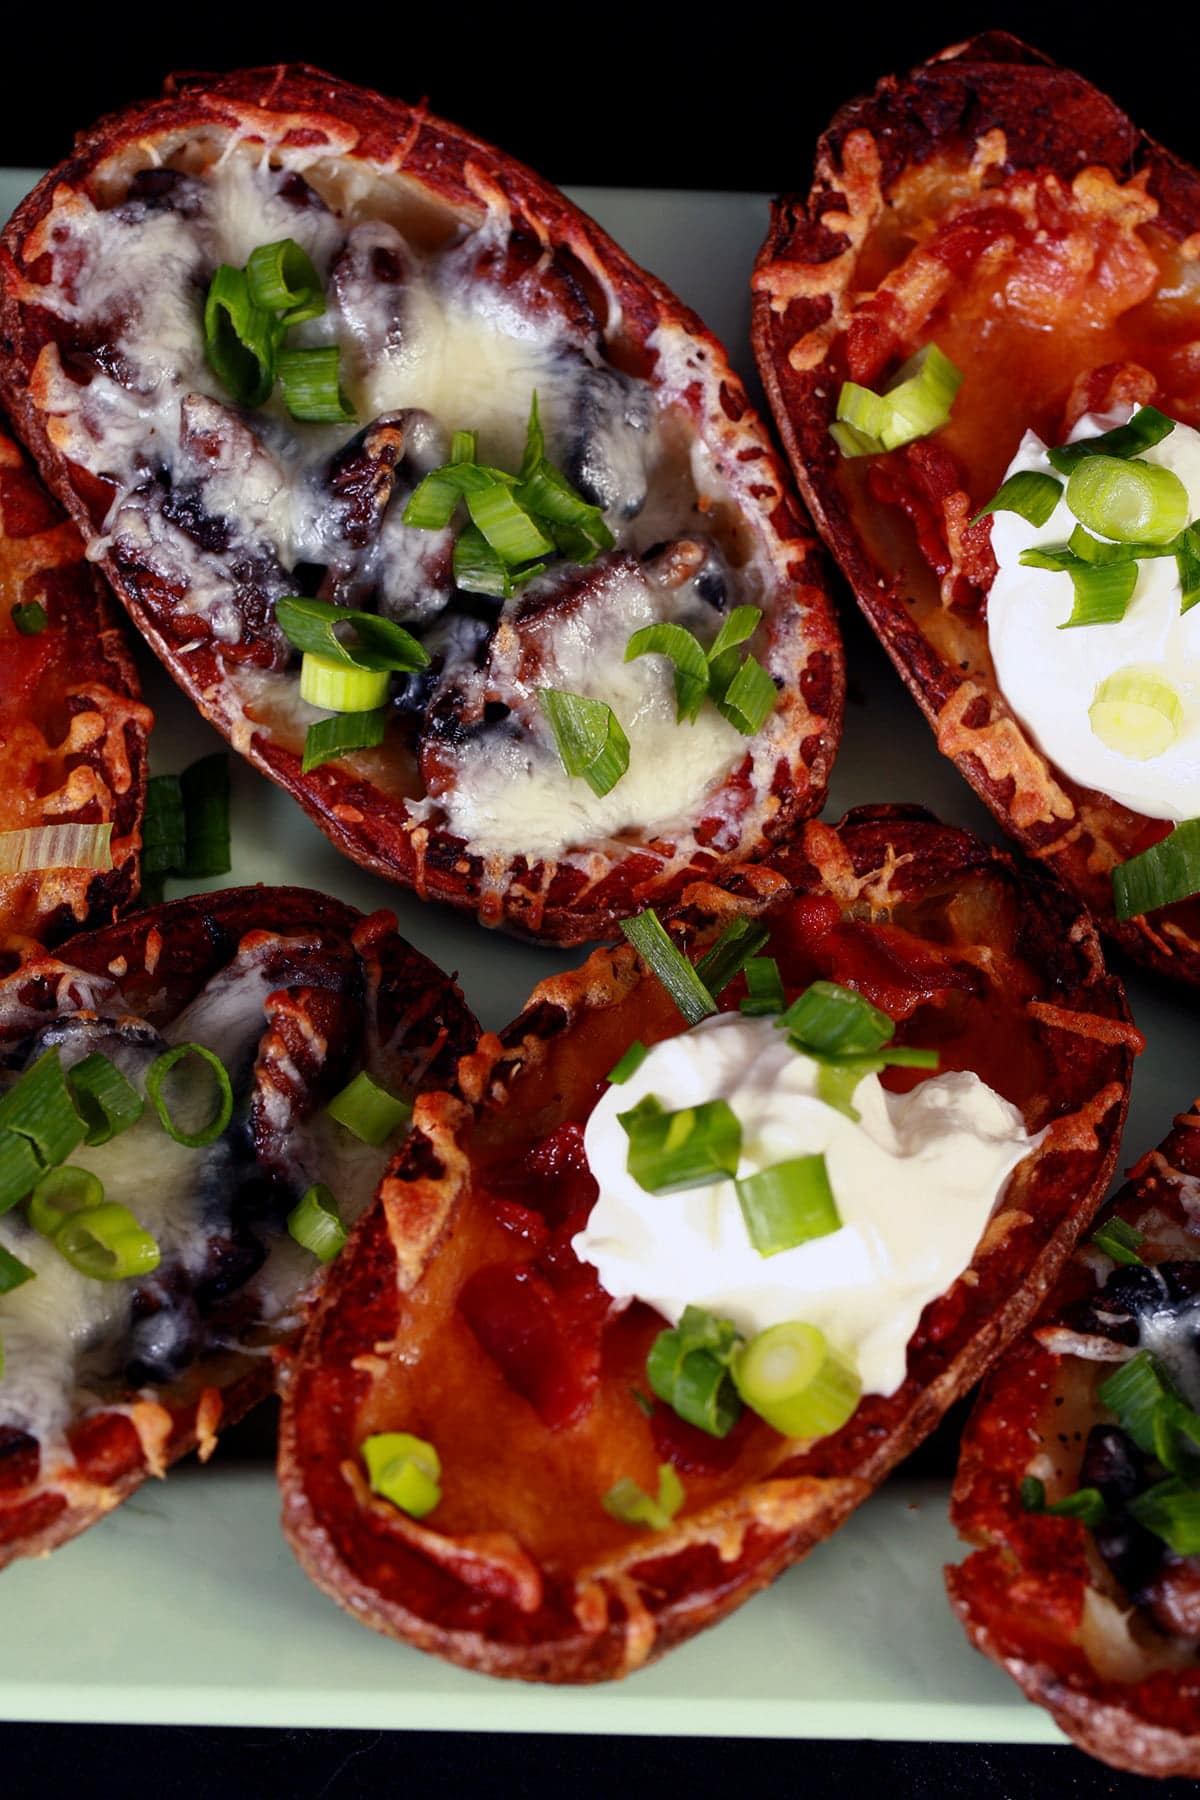 A pale green plate displays 8 bacon roasted potato skins. Half are filled with mushrooms and swiss cheese, the other half have bacon and cheddar as the filling, some topped with sour cream. Most potato skins are sprinkled with sliced green onion.